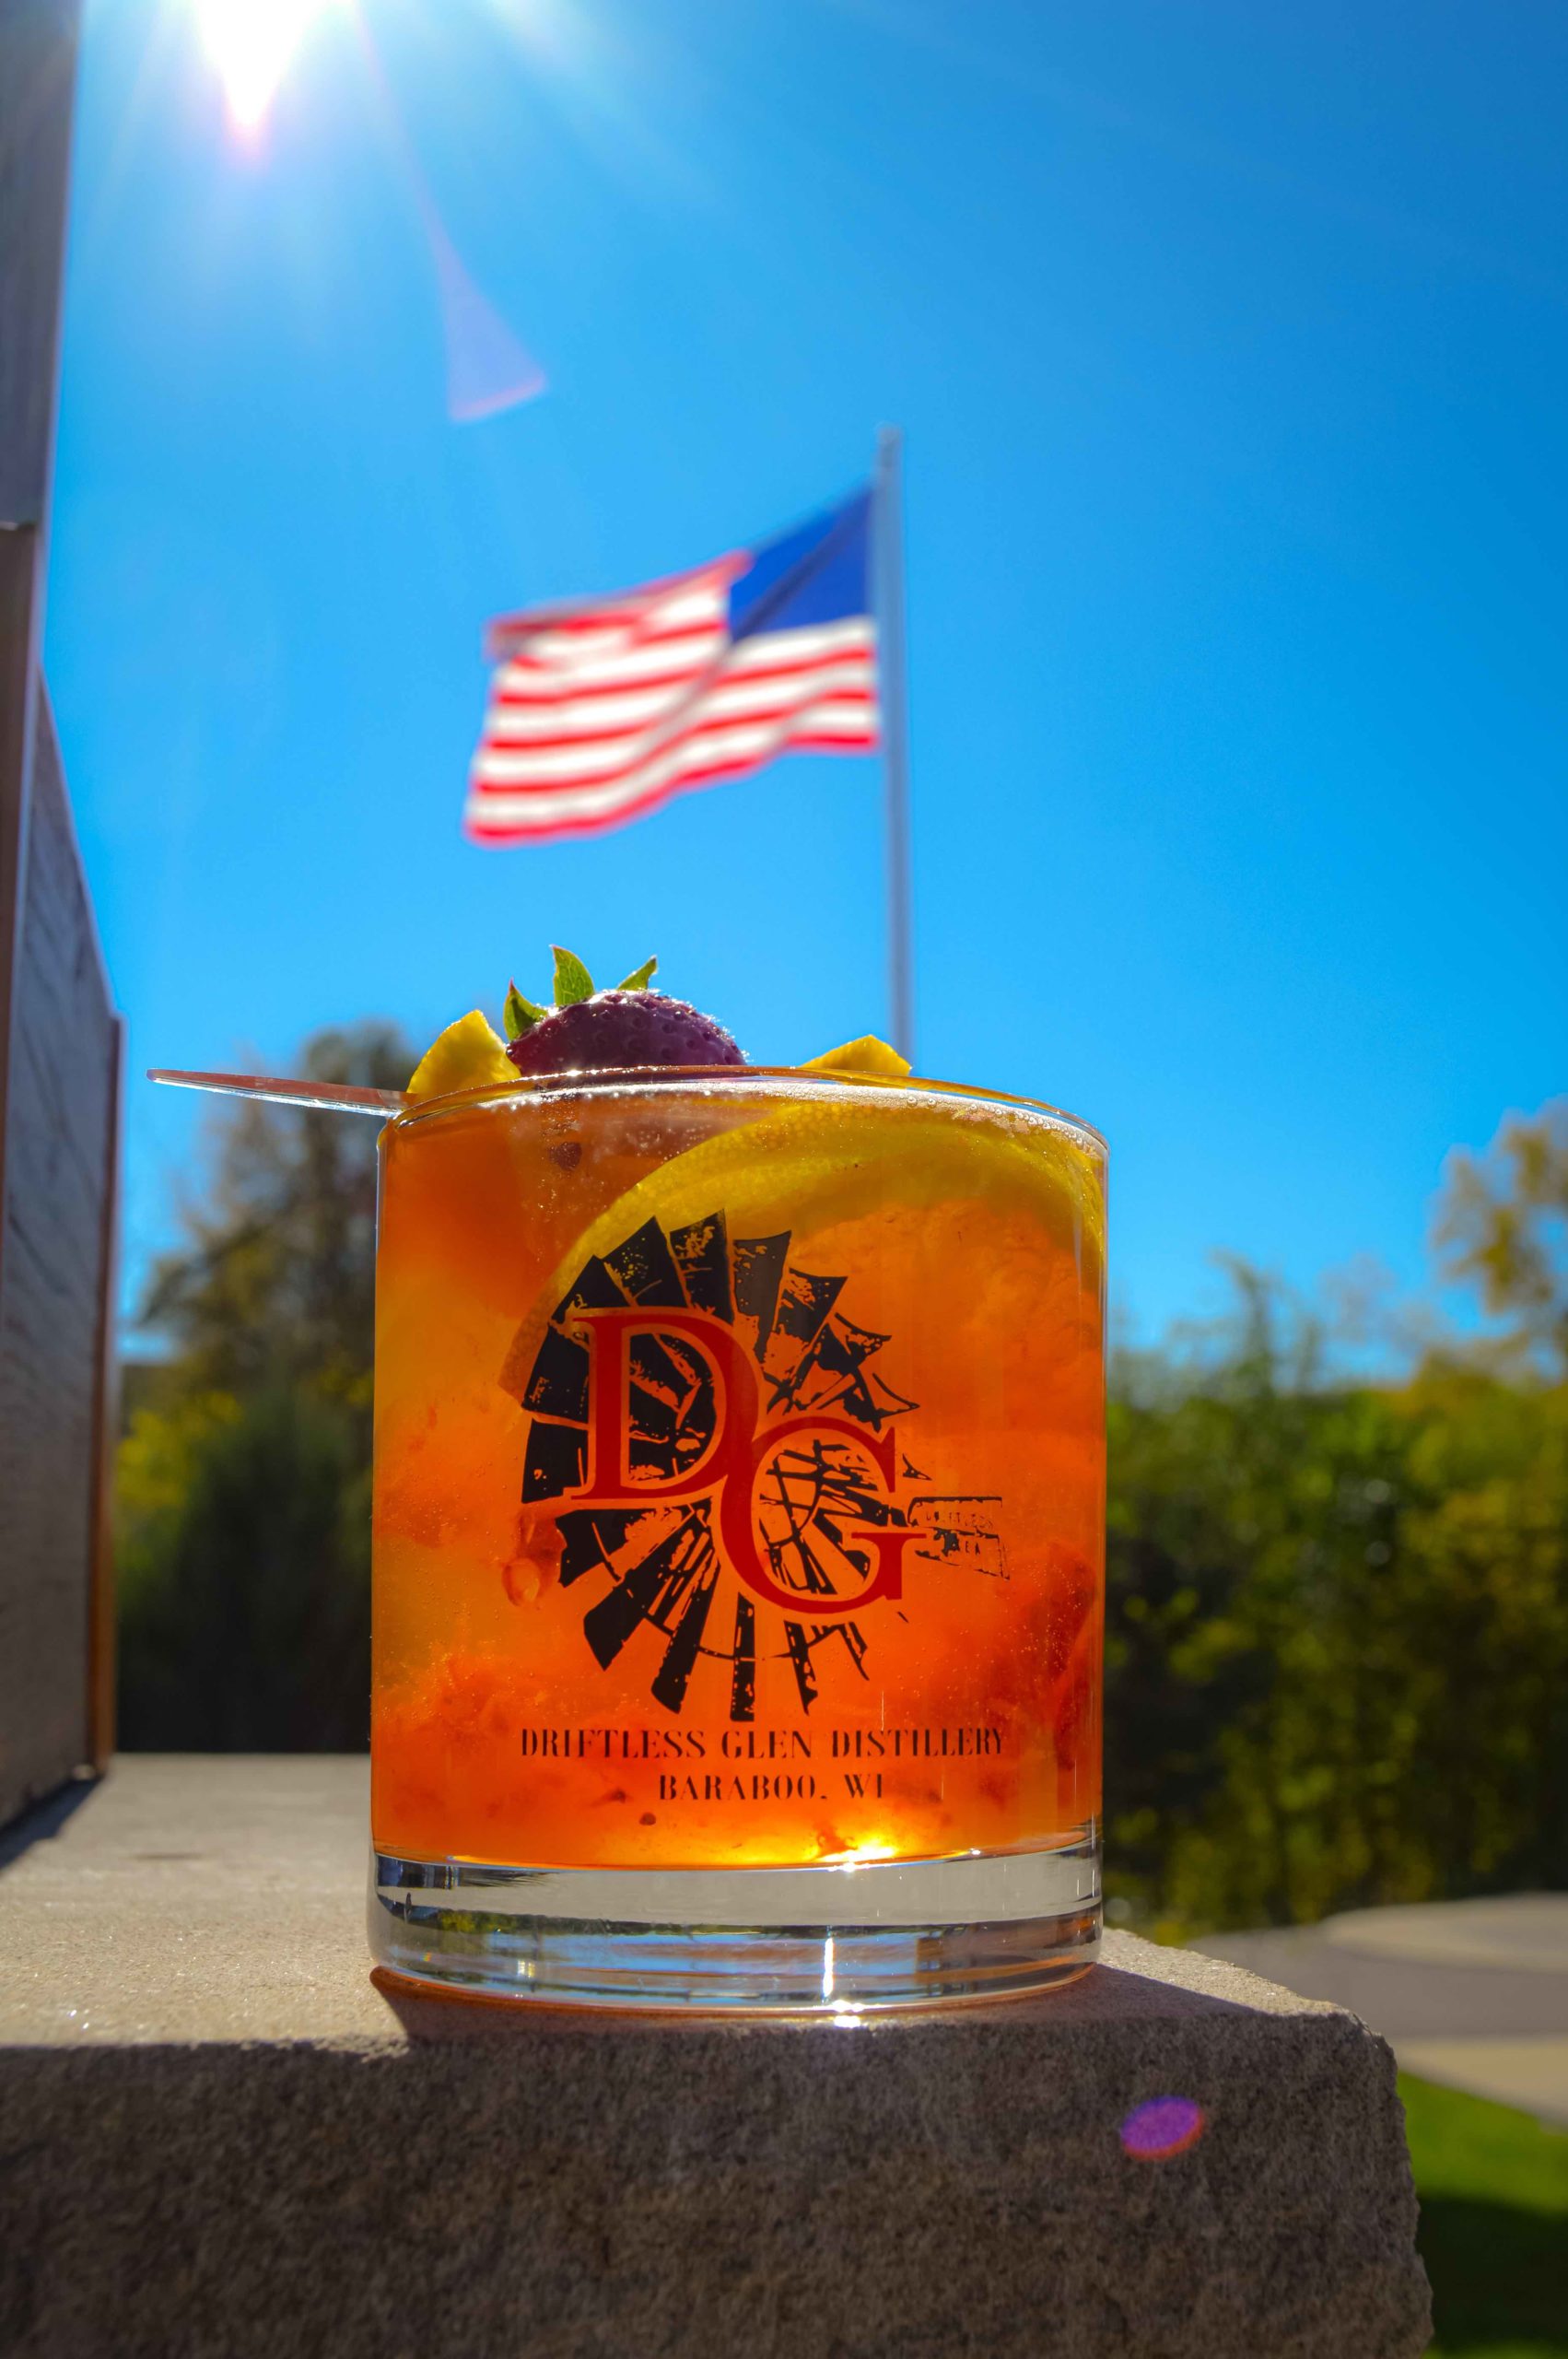 Strawberry Peach Old Fashioned for #mixologymonday sits in front of a blue sky outside with the flag pole in the background